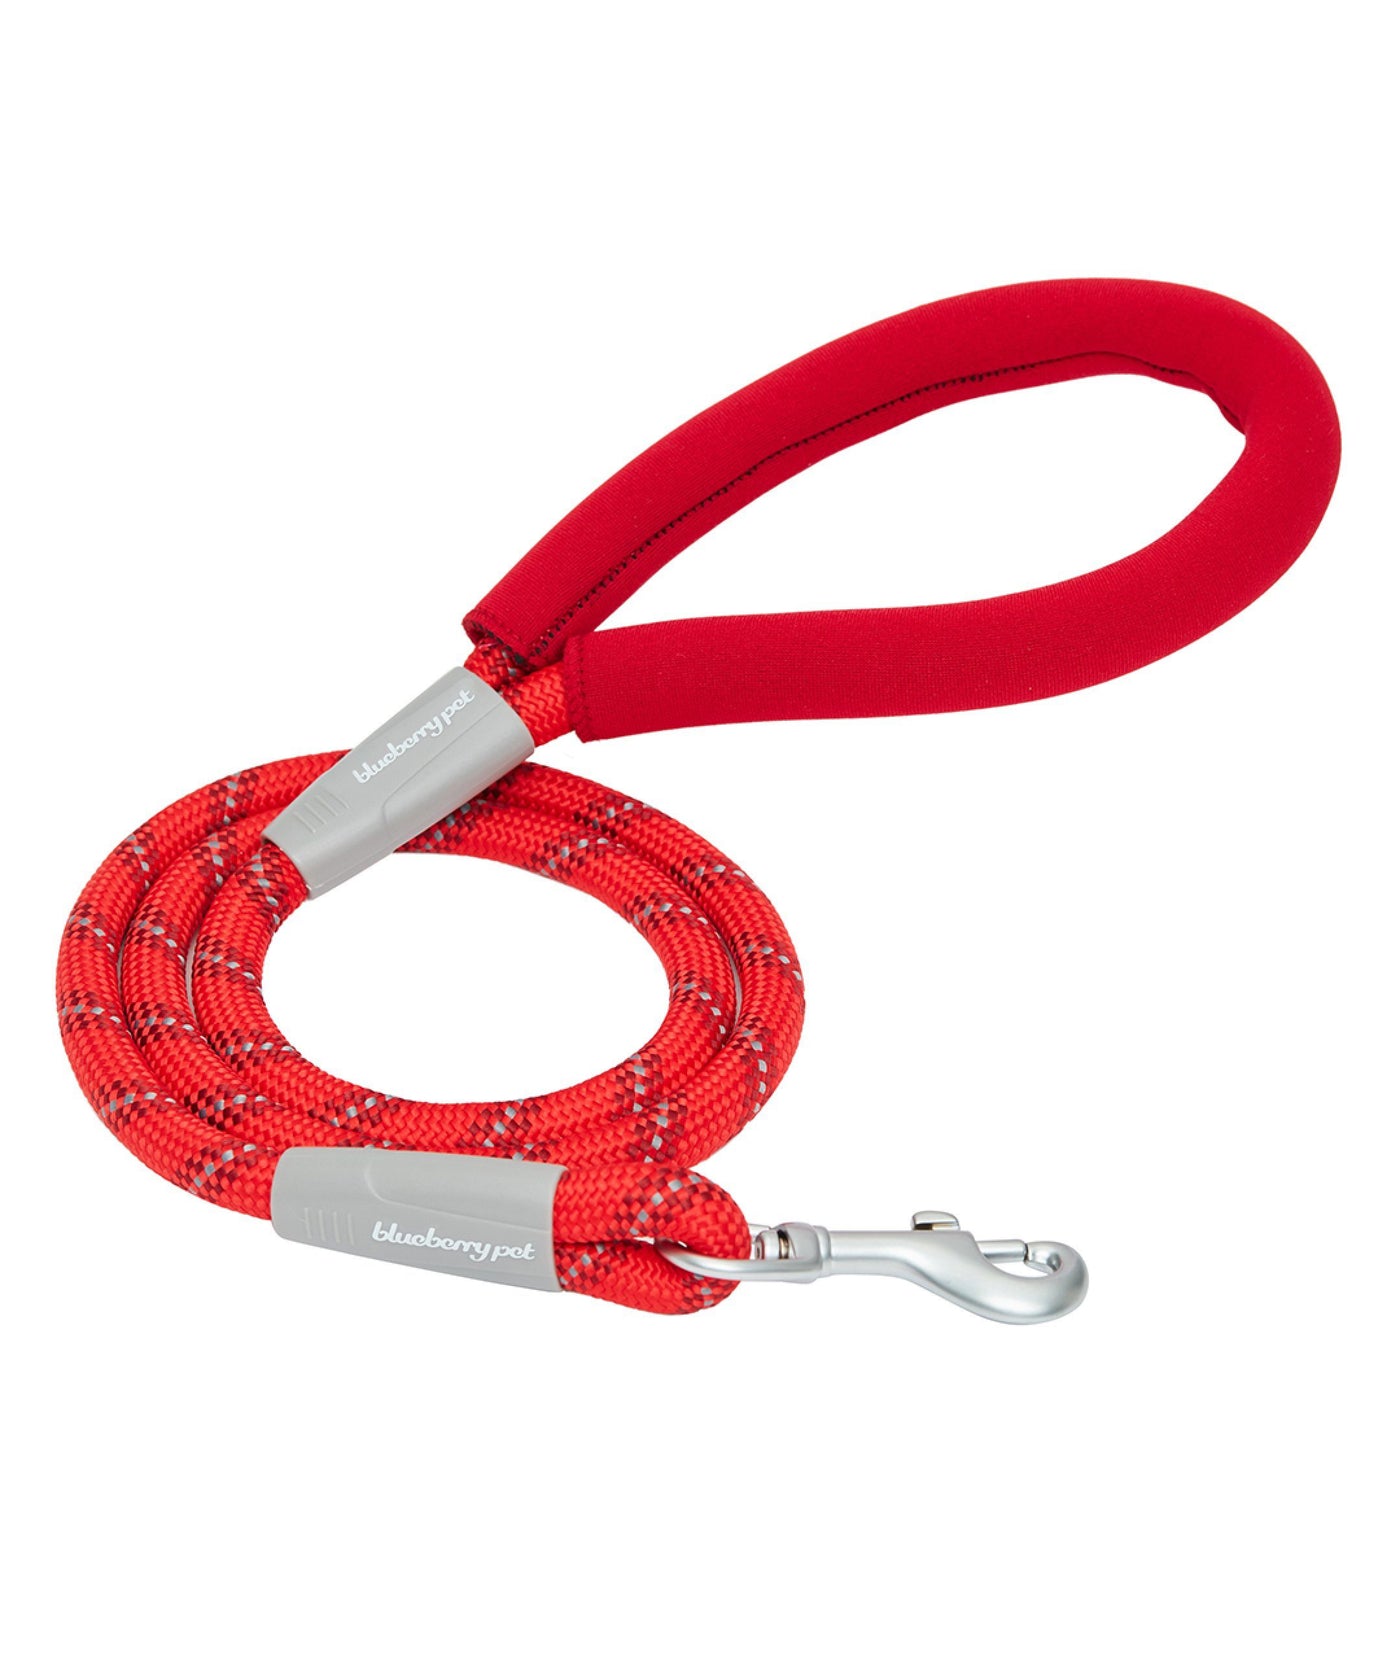 Blueberry Pet Striped Rope Dog Leash Leash Blueberry Pet Red 